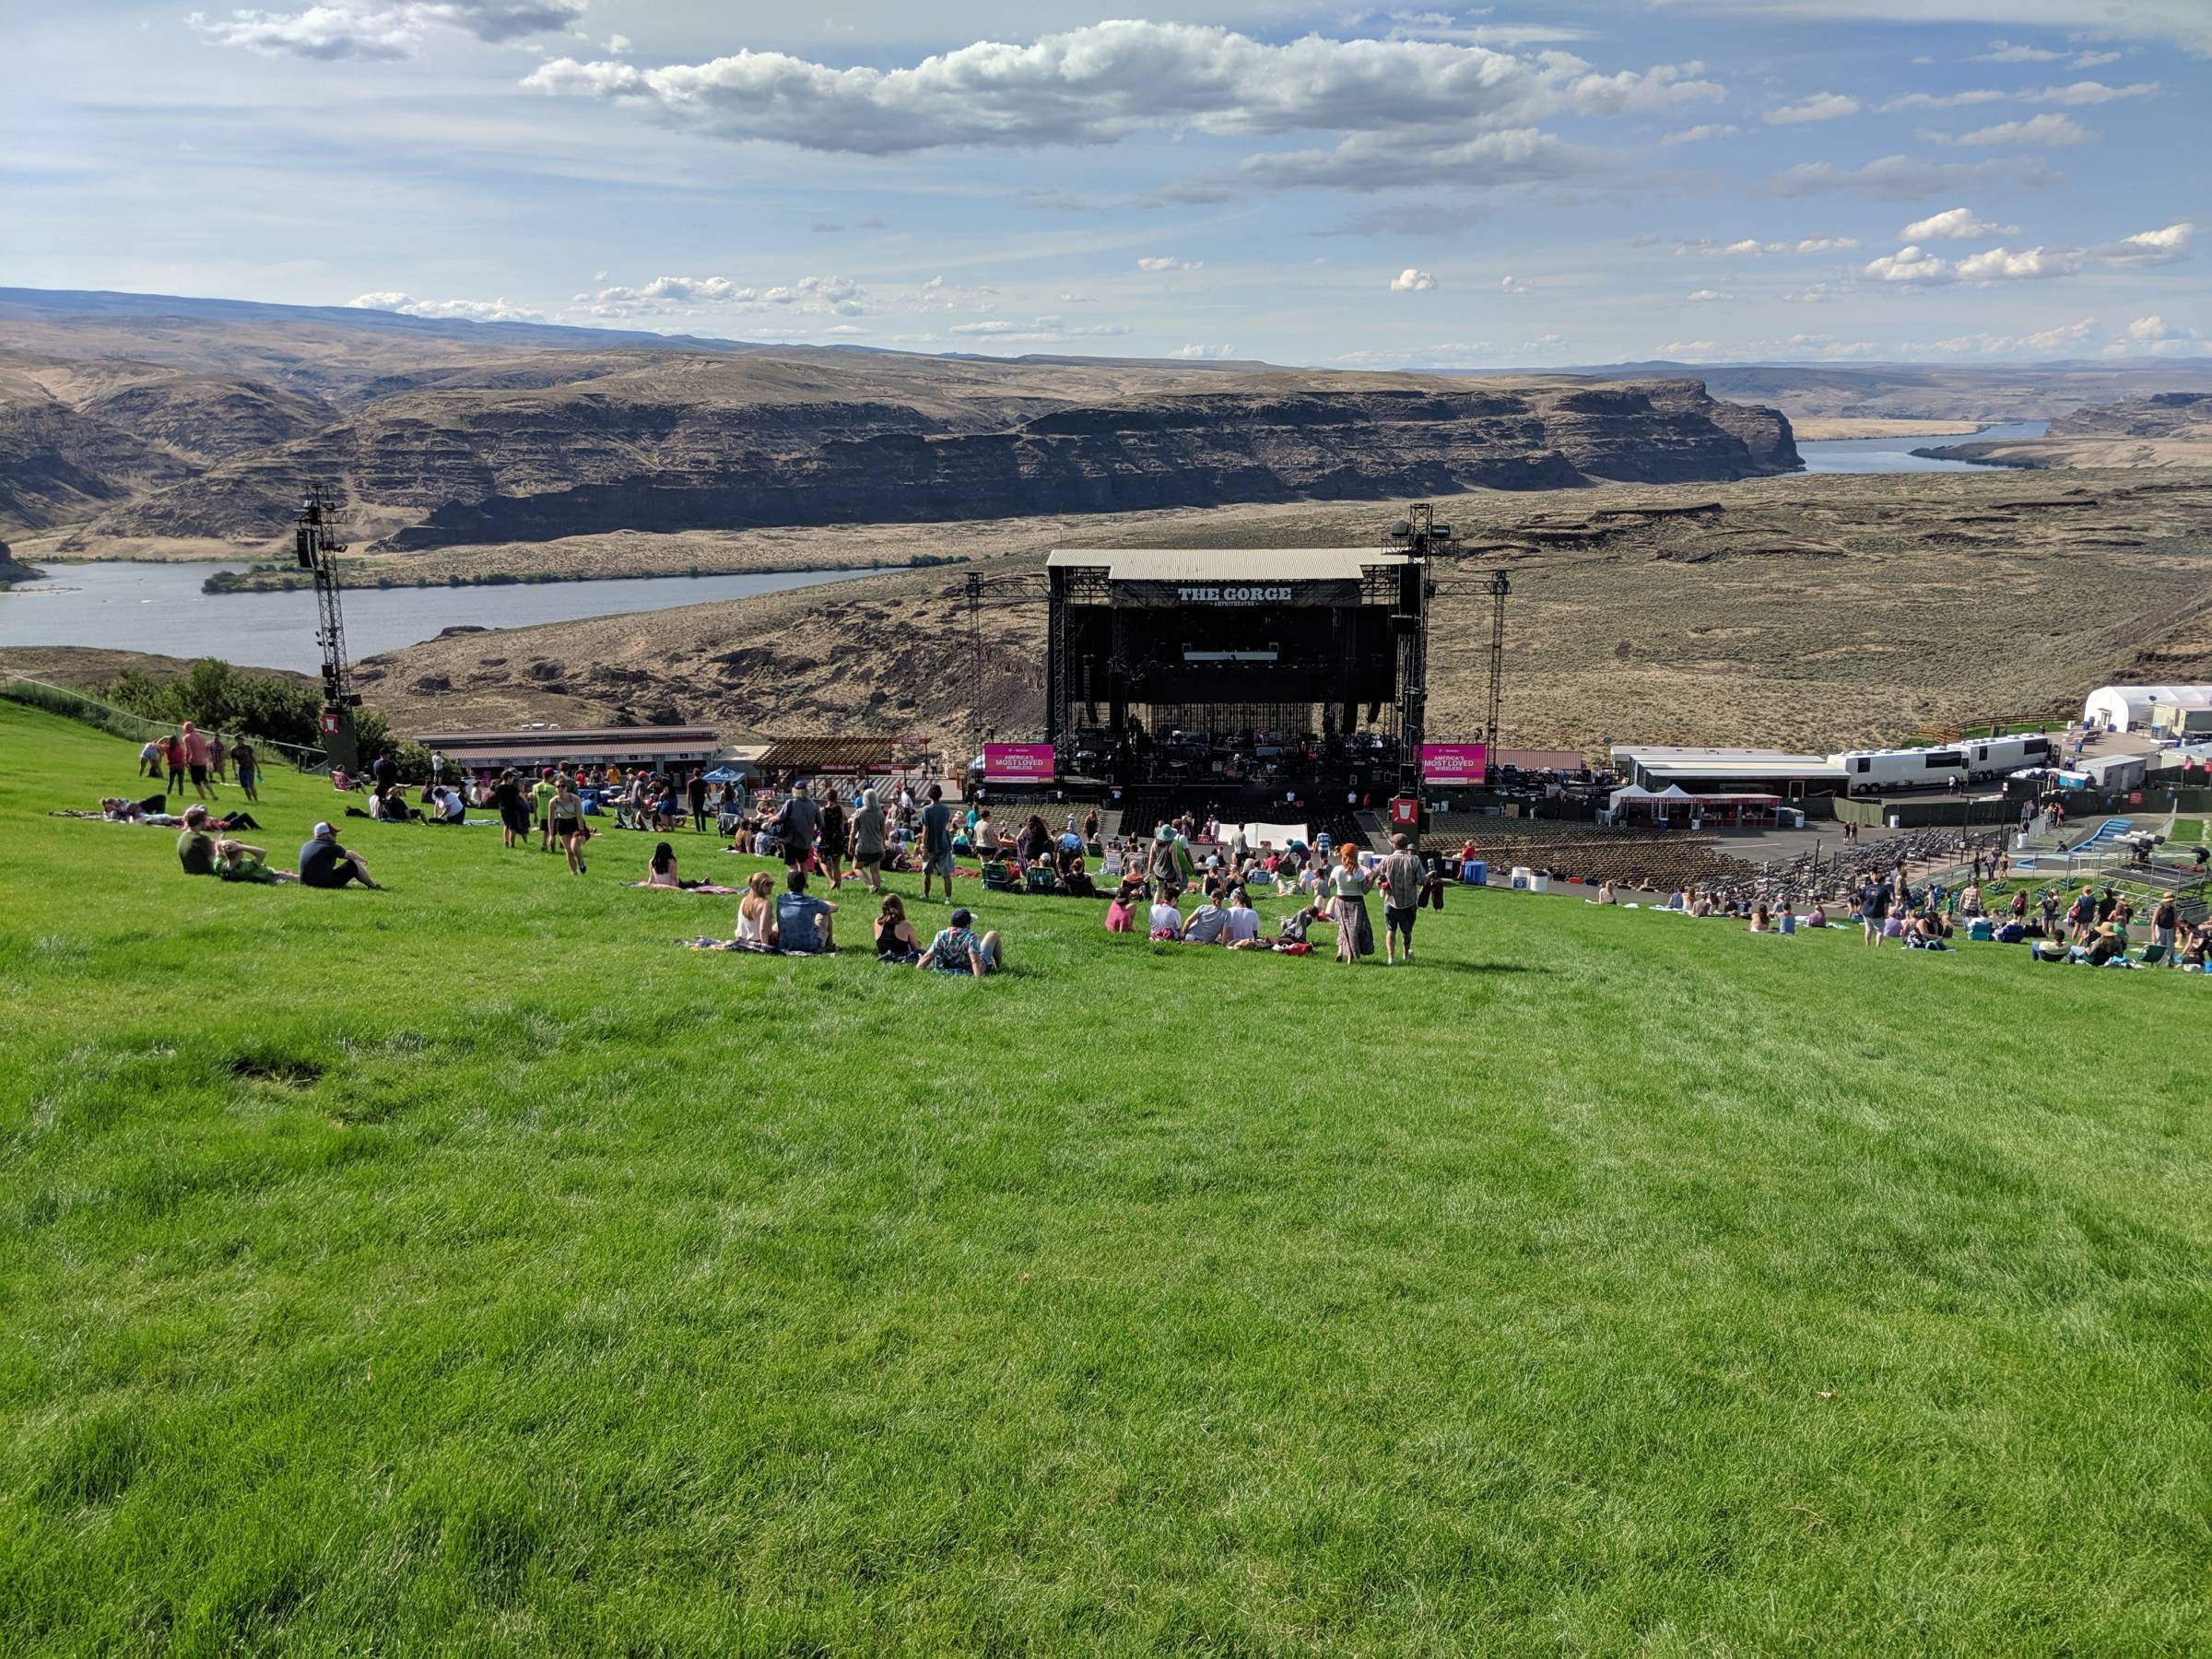 The view from the lawn at the Gorge Amphitheatre